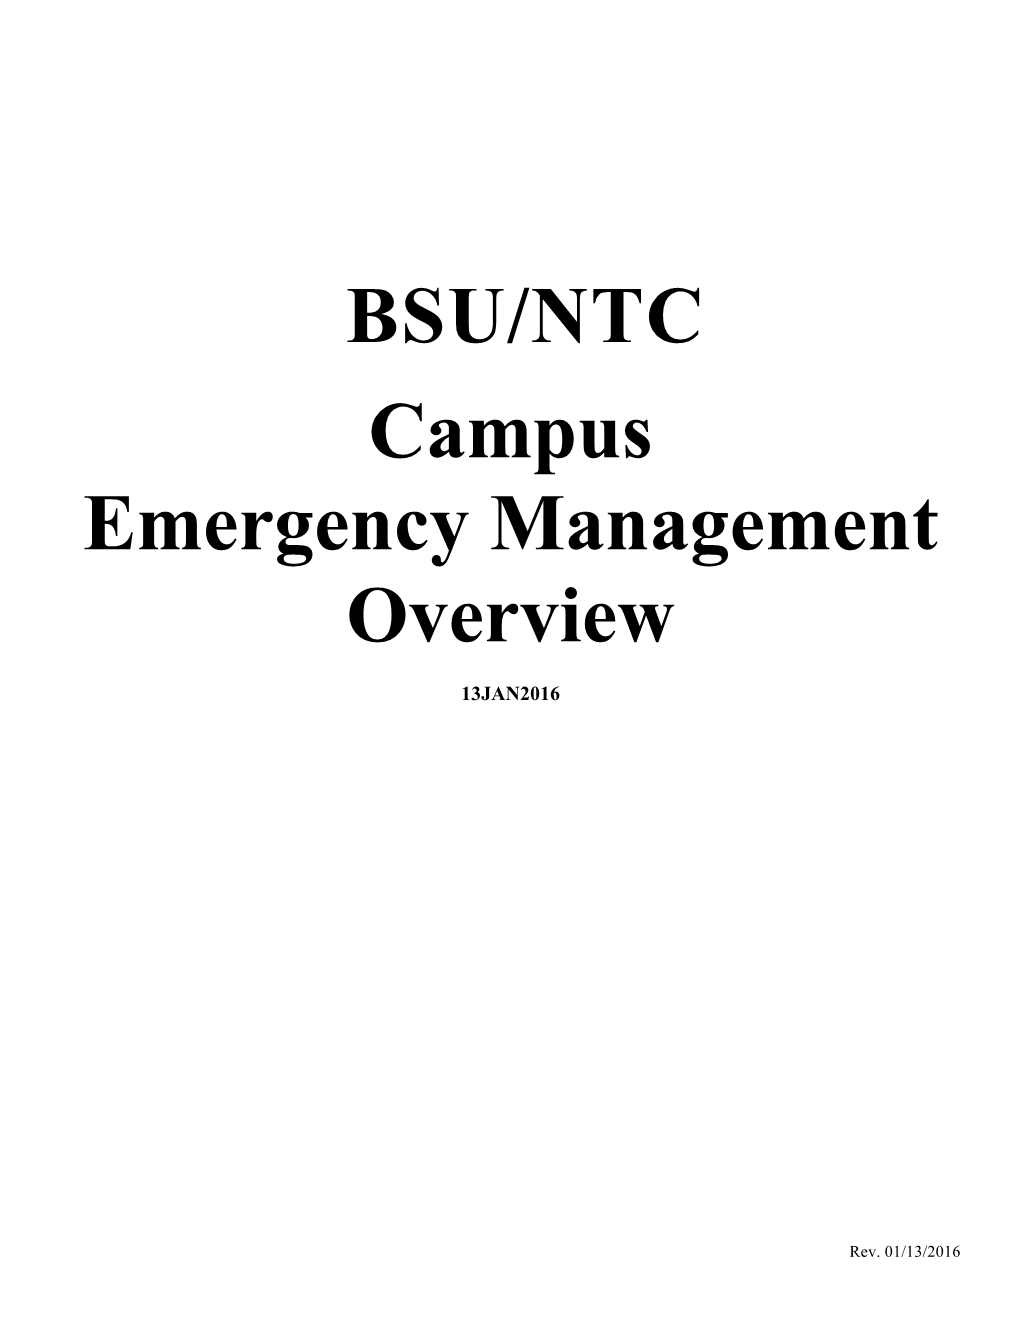 BSU-NTC Emergency Management Overview, 2016-1-13